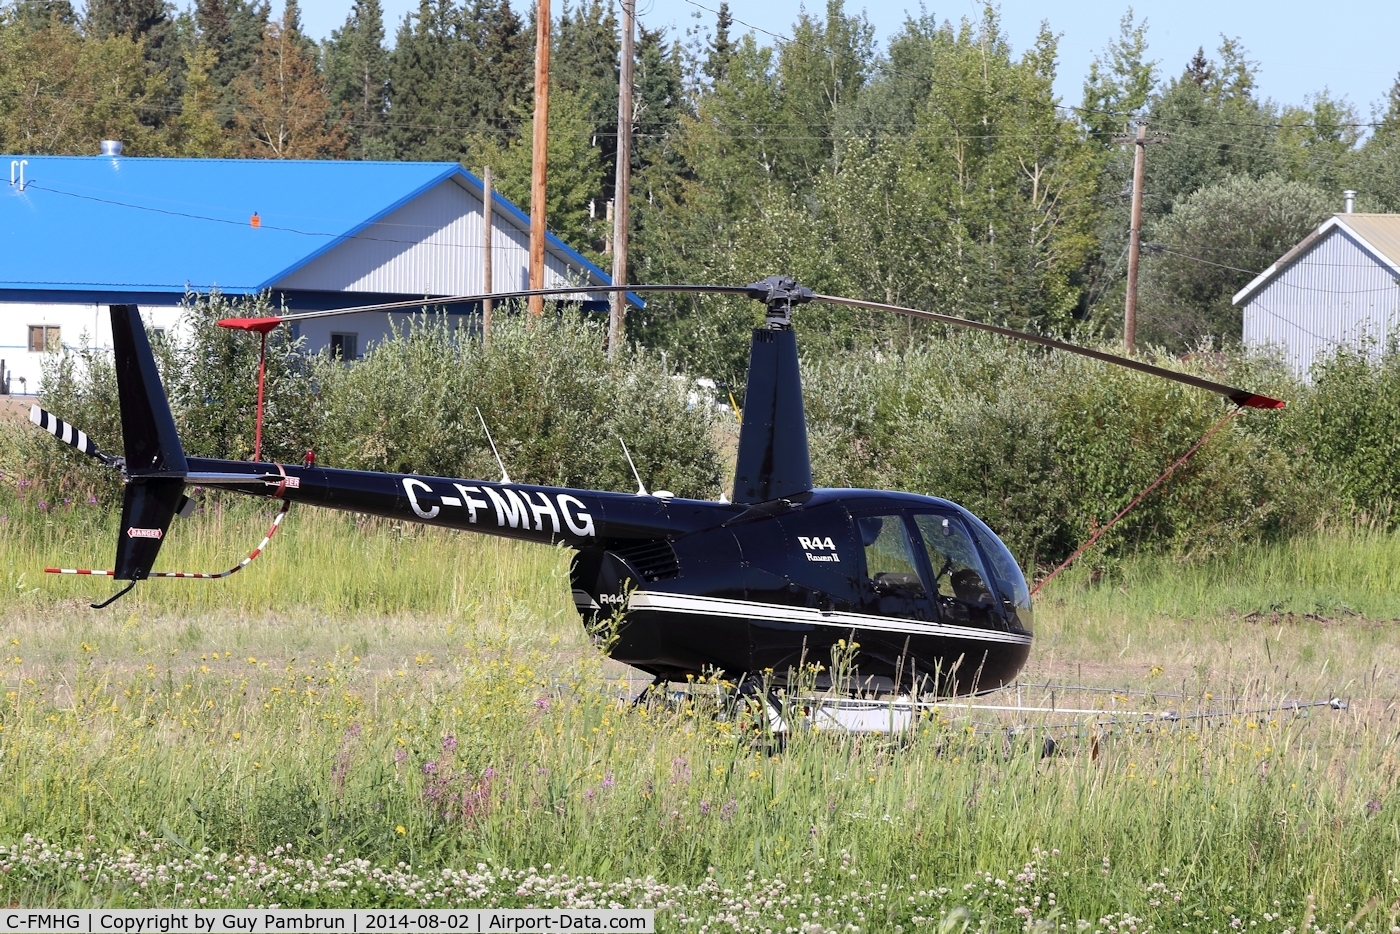 C-FMHG, 2007 Robinson R44 II C/N 11708, On standby for forest fire detail in Zama City, Alberta